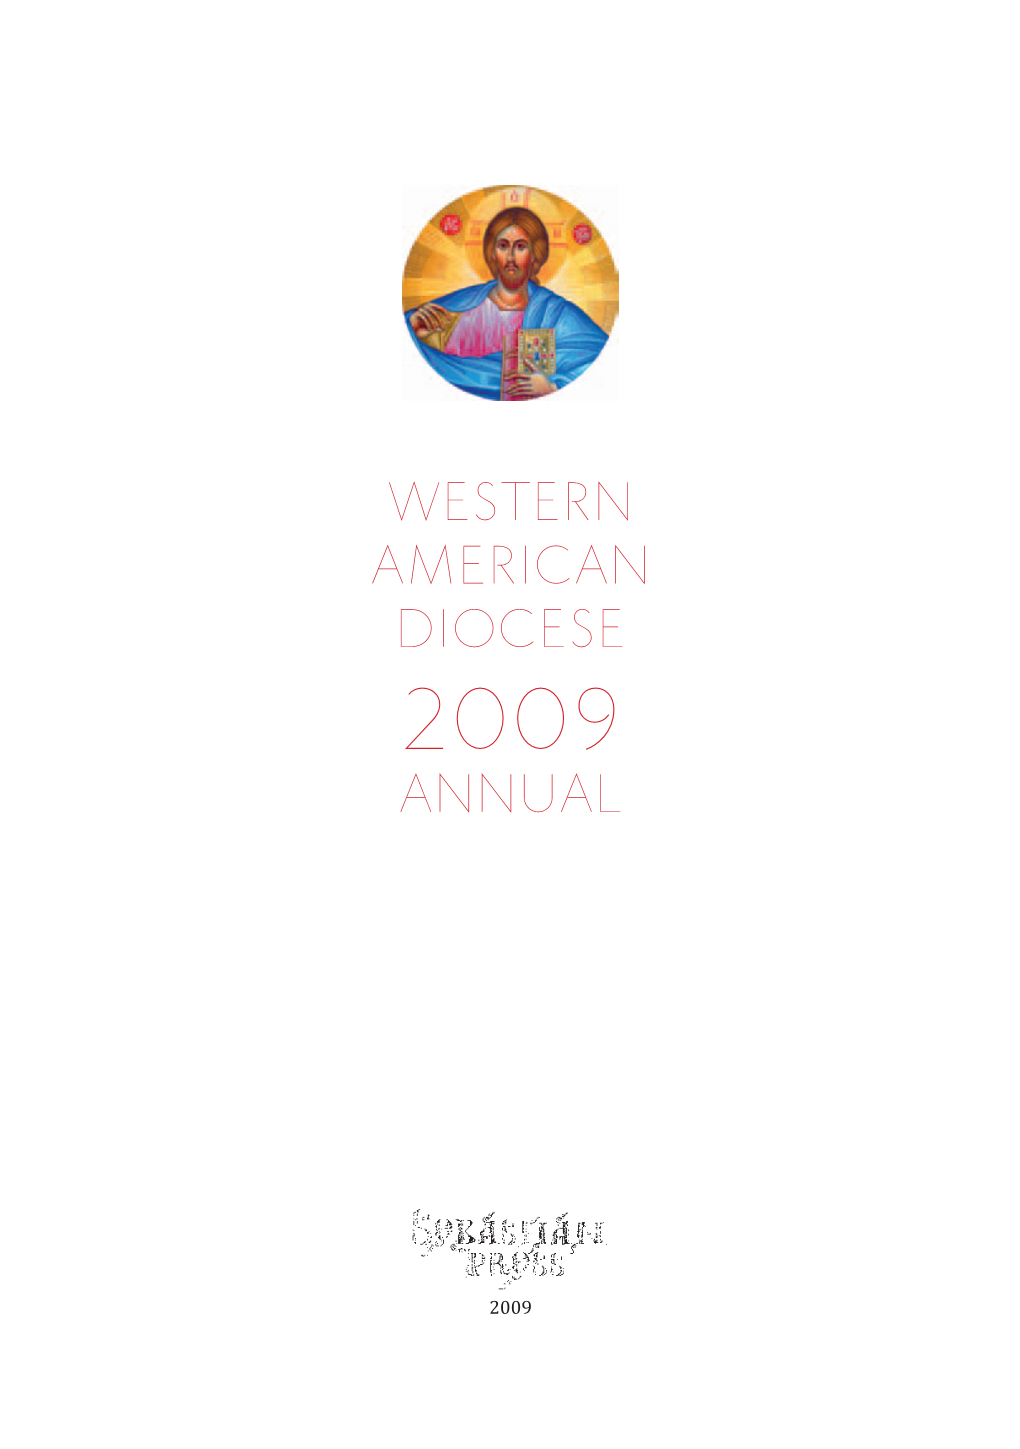 Western American Diocese Annual